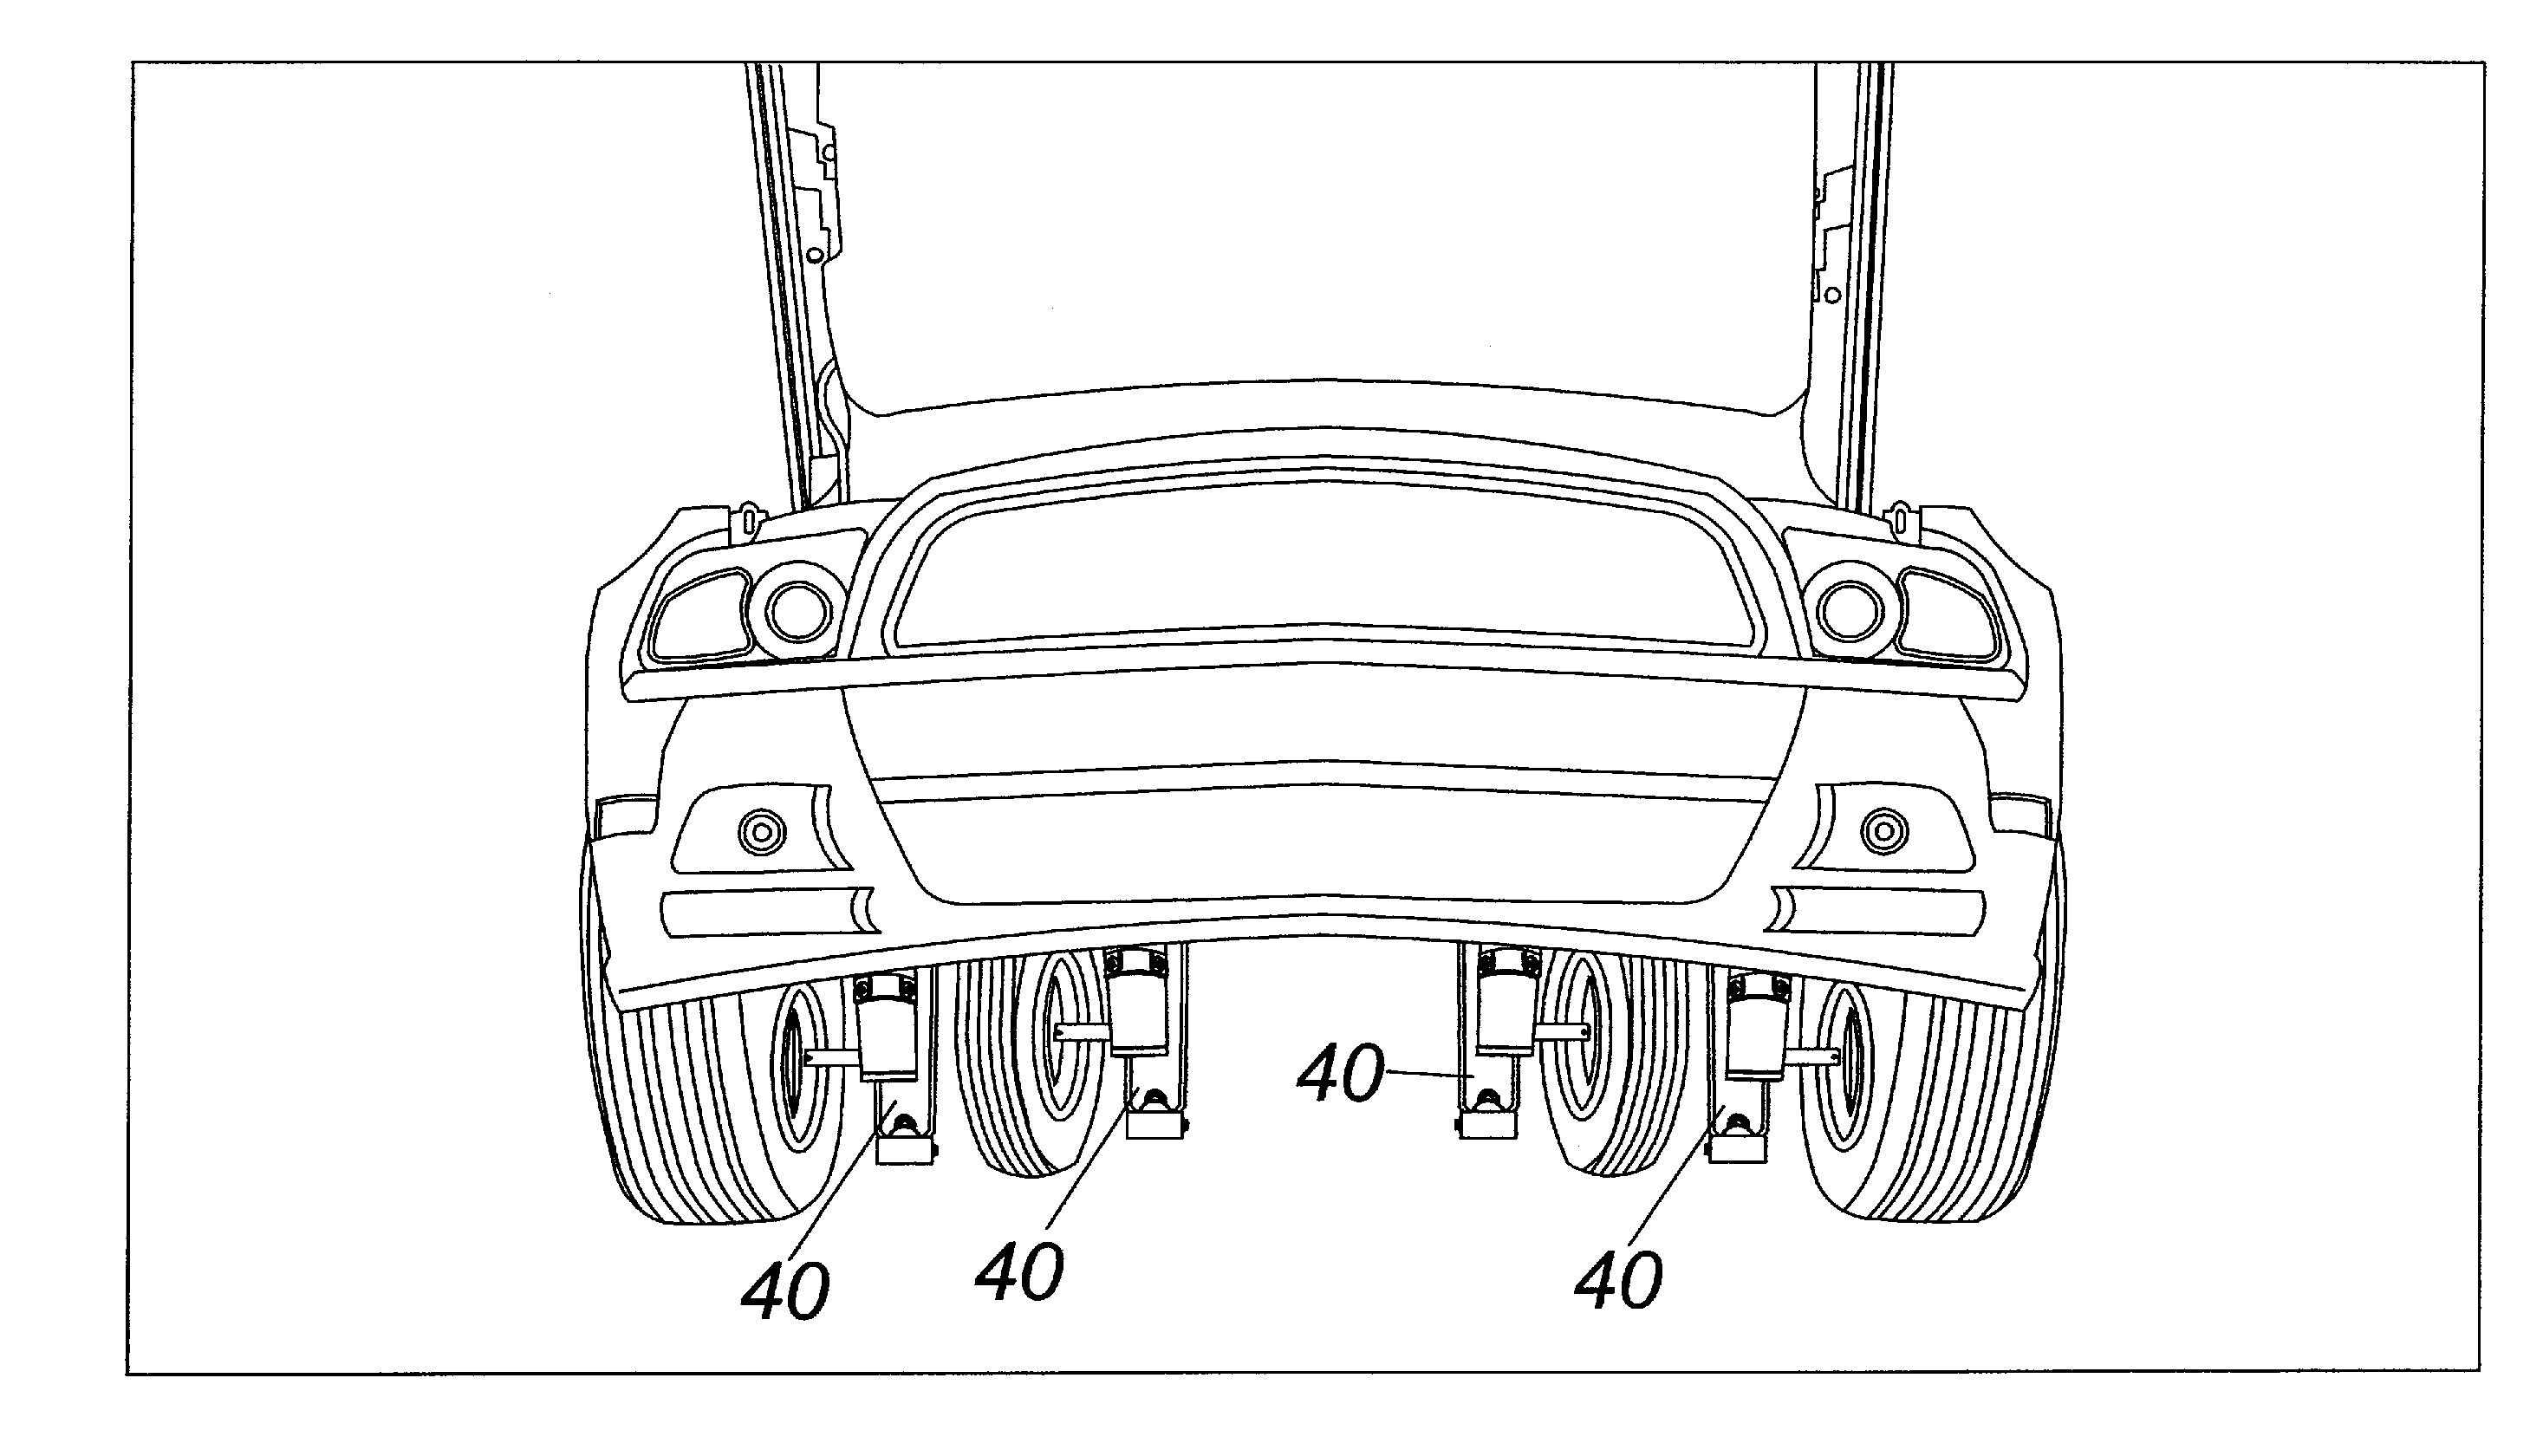 Vehicle lifting and parallel parking aid